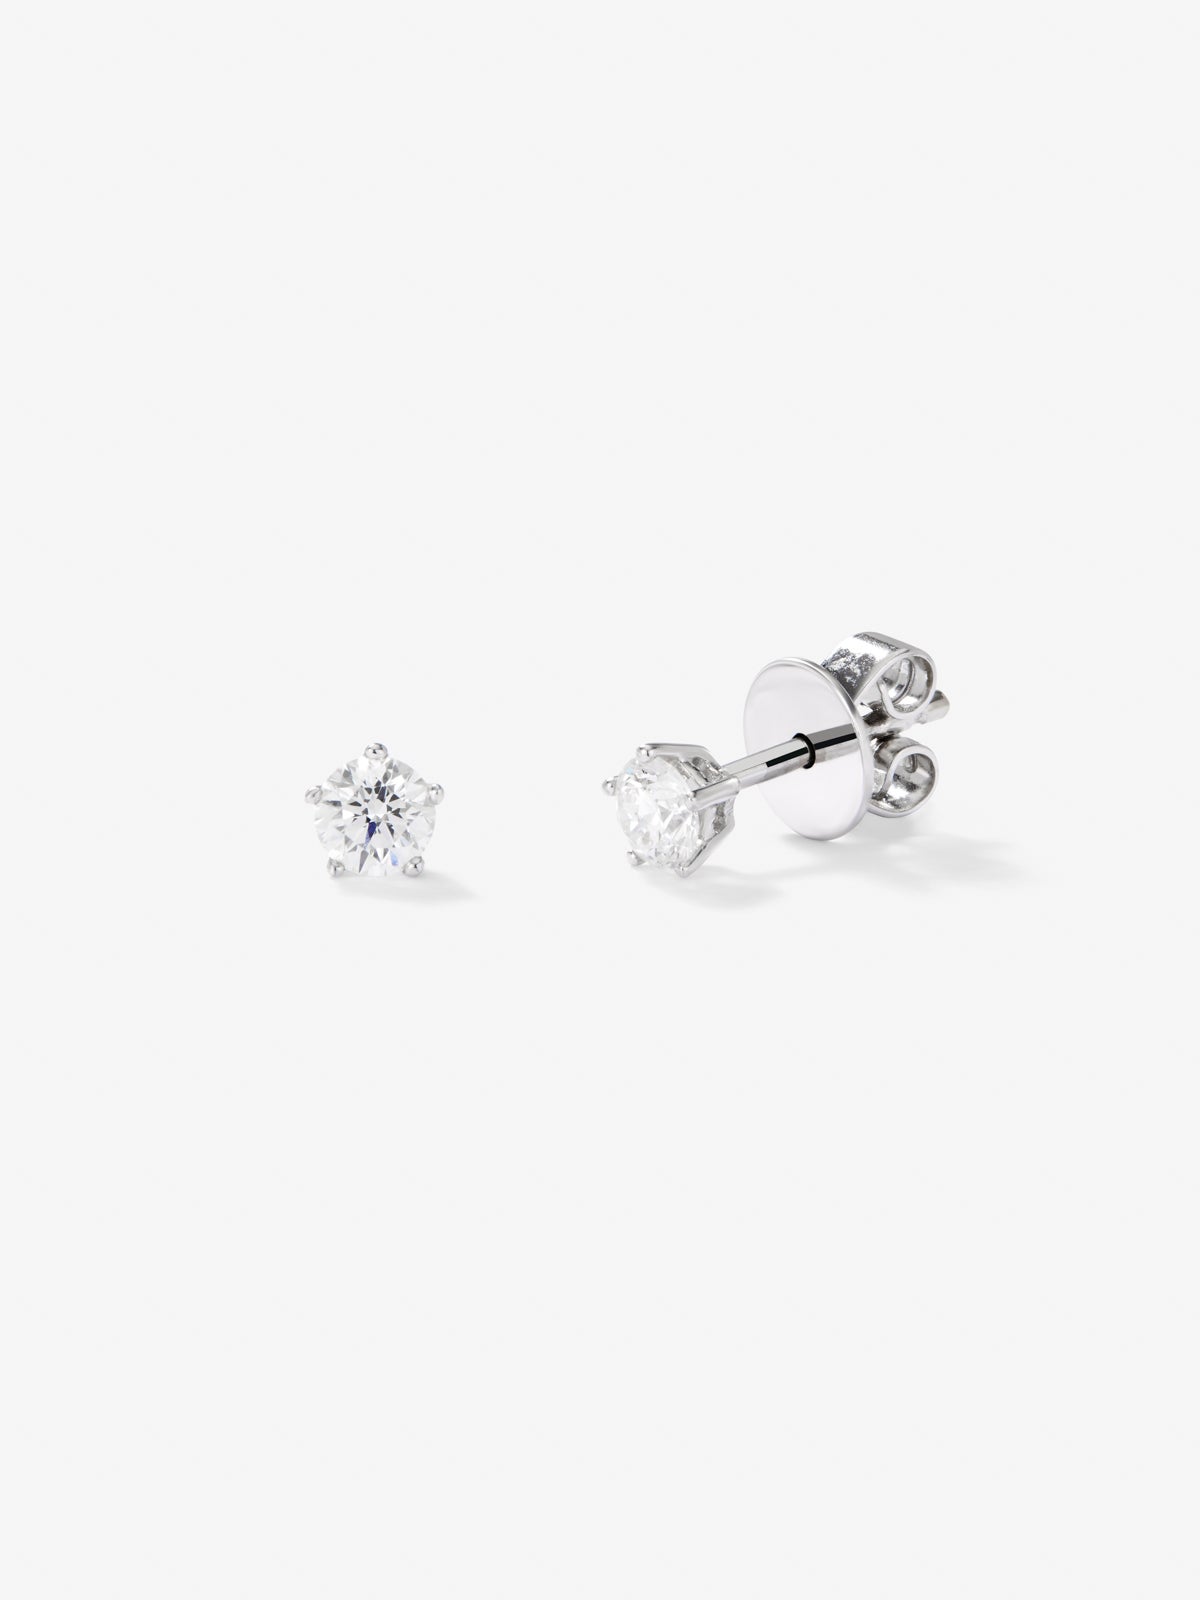 18K white gold solitaire earrings with 2 brilliant-cut diamonds with a total of 0.4 cts